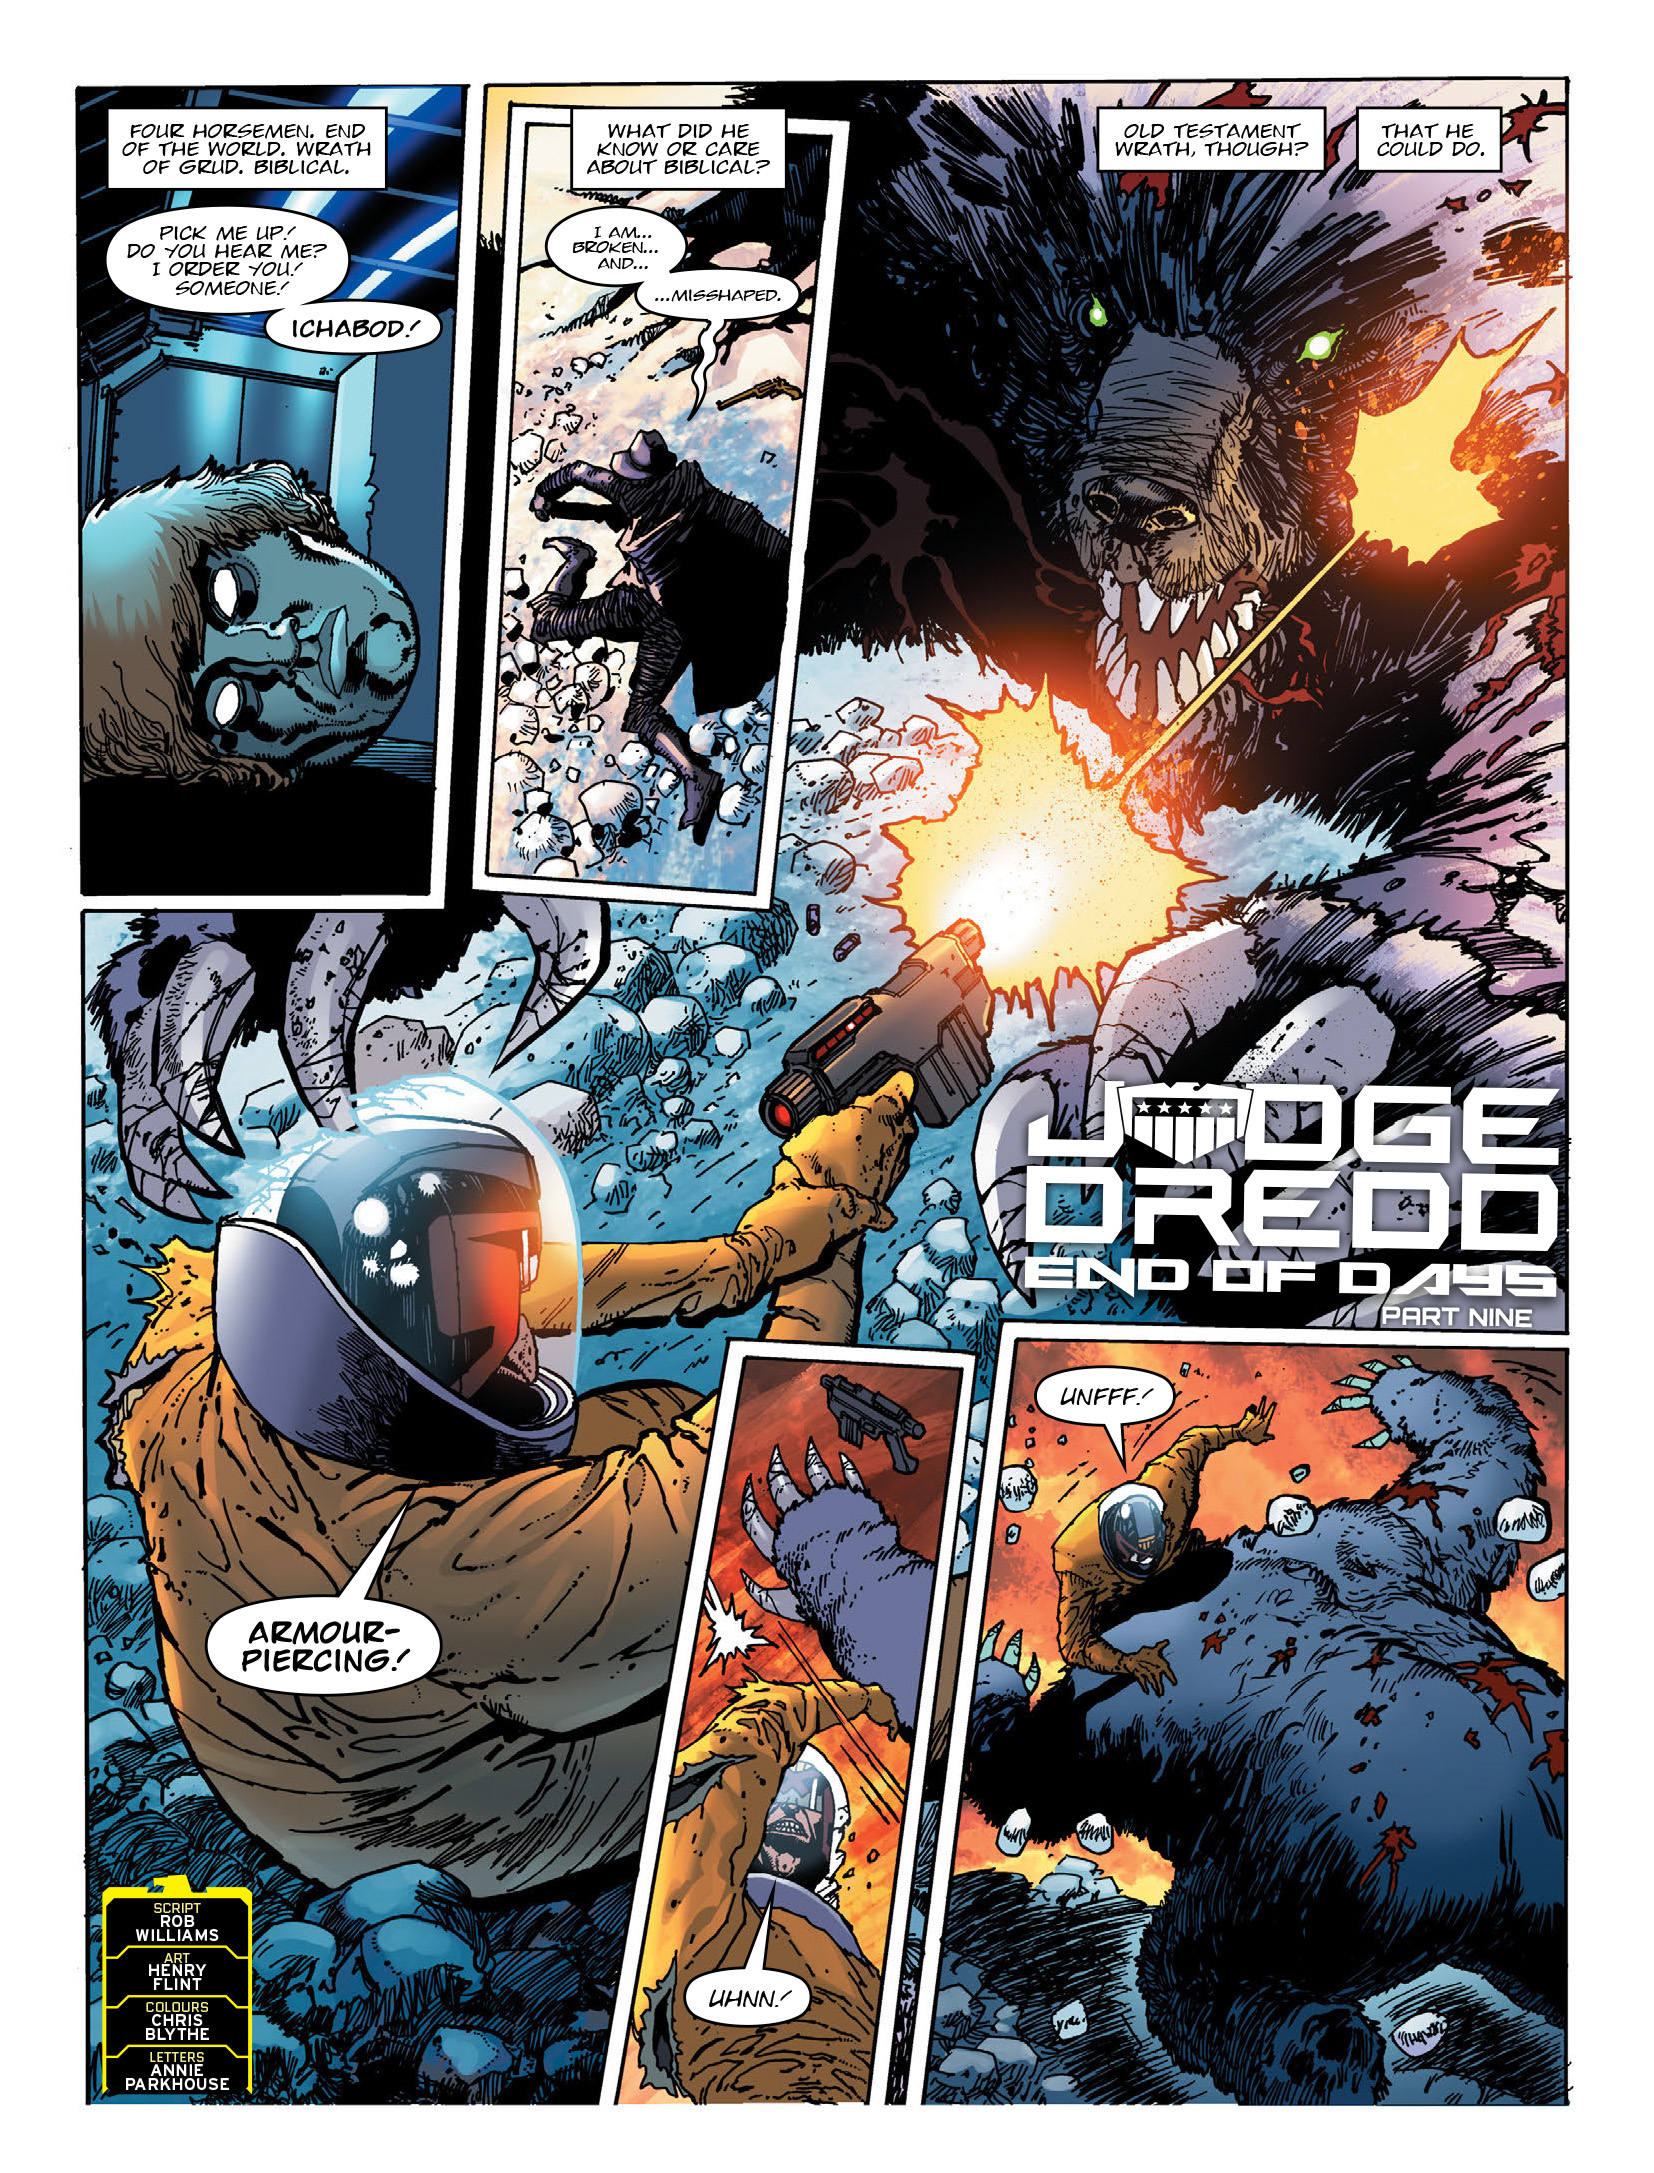 2000 AD: Chapter 2192 - Page 3